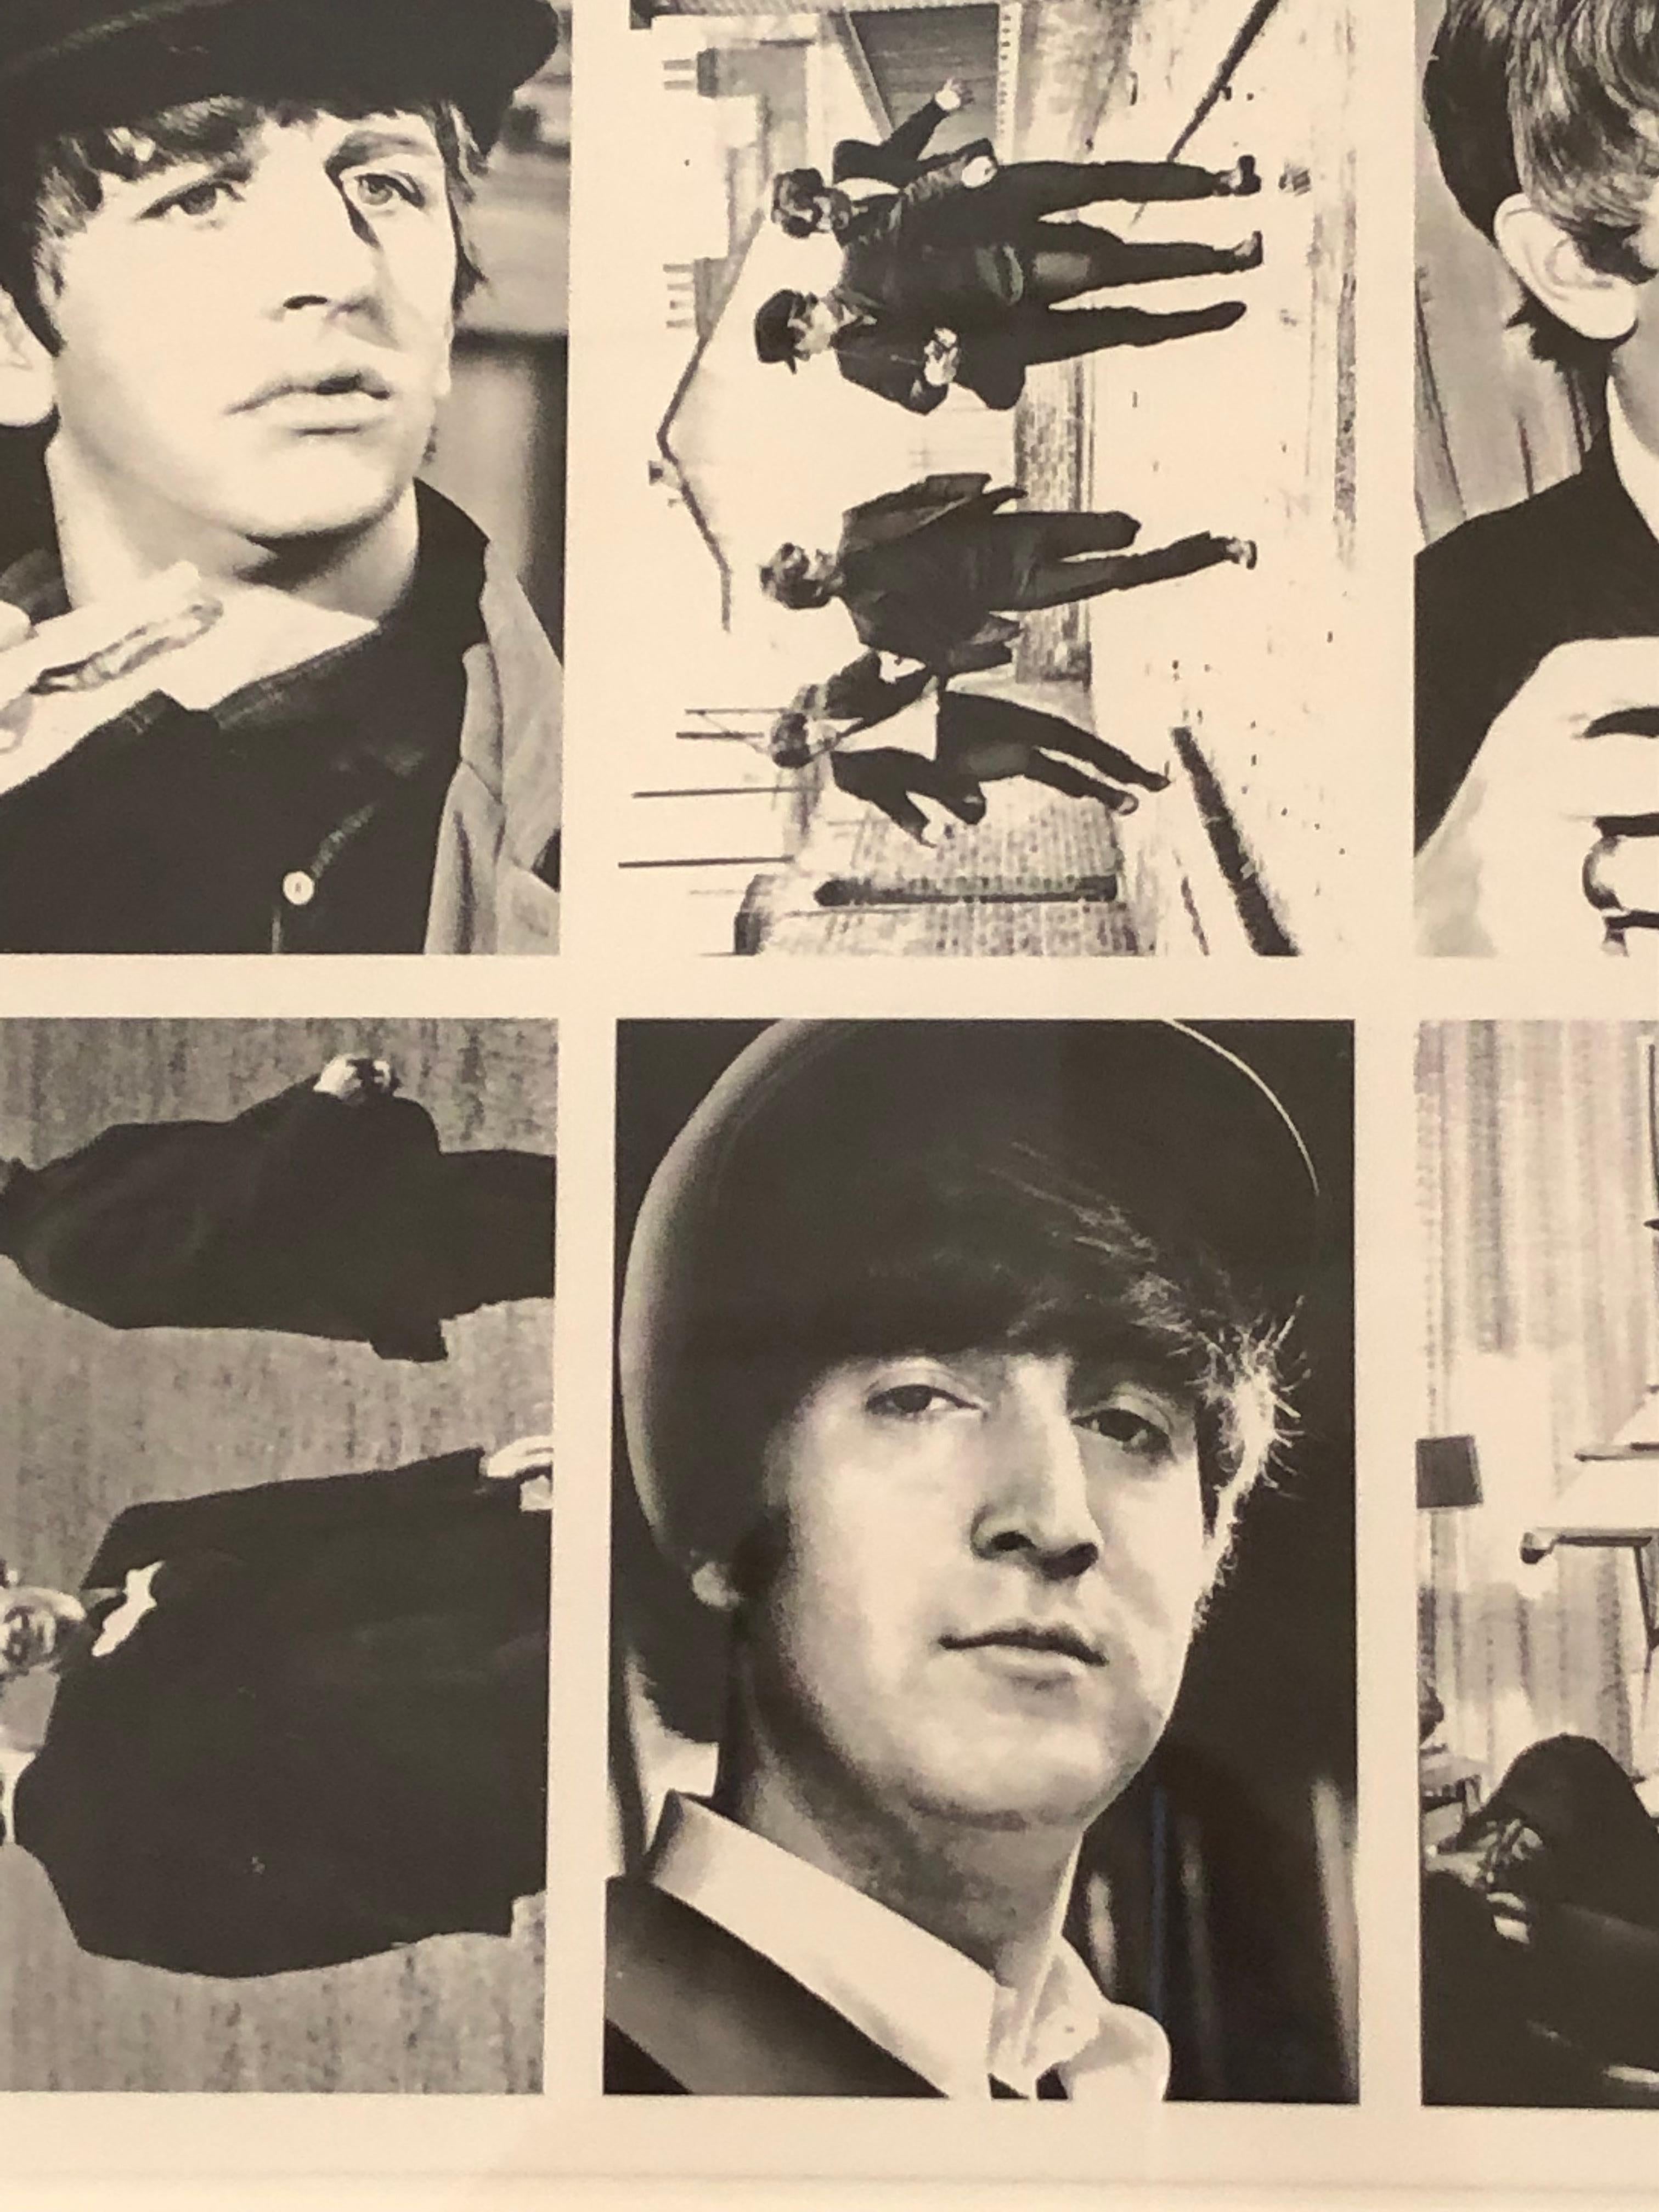 You don't see this very often! Wonderful piece of Beatles memorabilia in this framed black and white uncut sheet of collectible Beatles trading cards. Dozens of photos of the fab 4 from their Hard Day's Night motion picture. Special candid photos